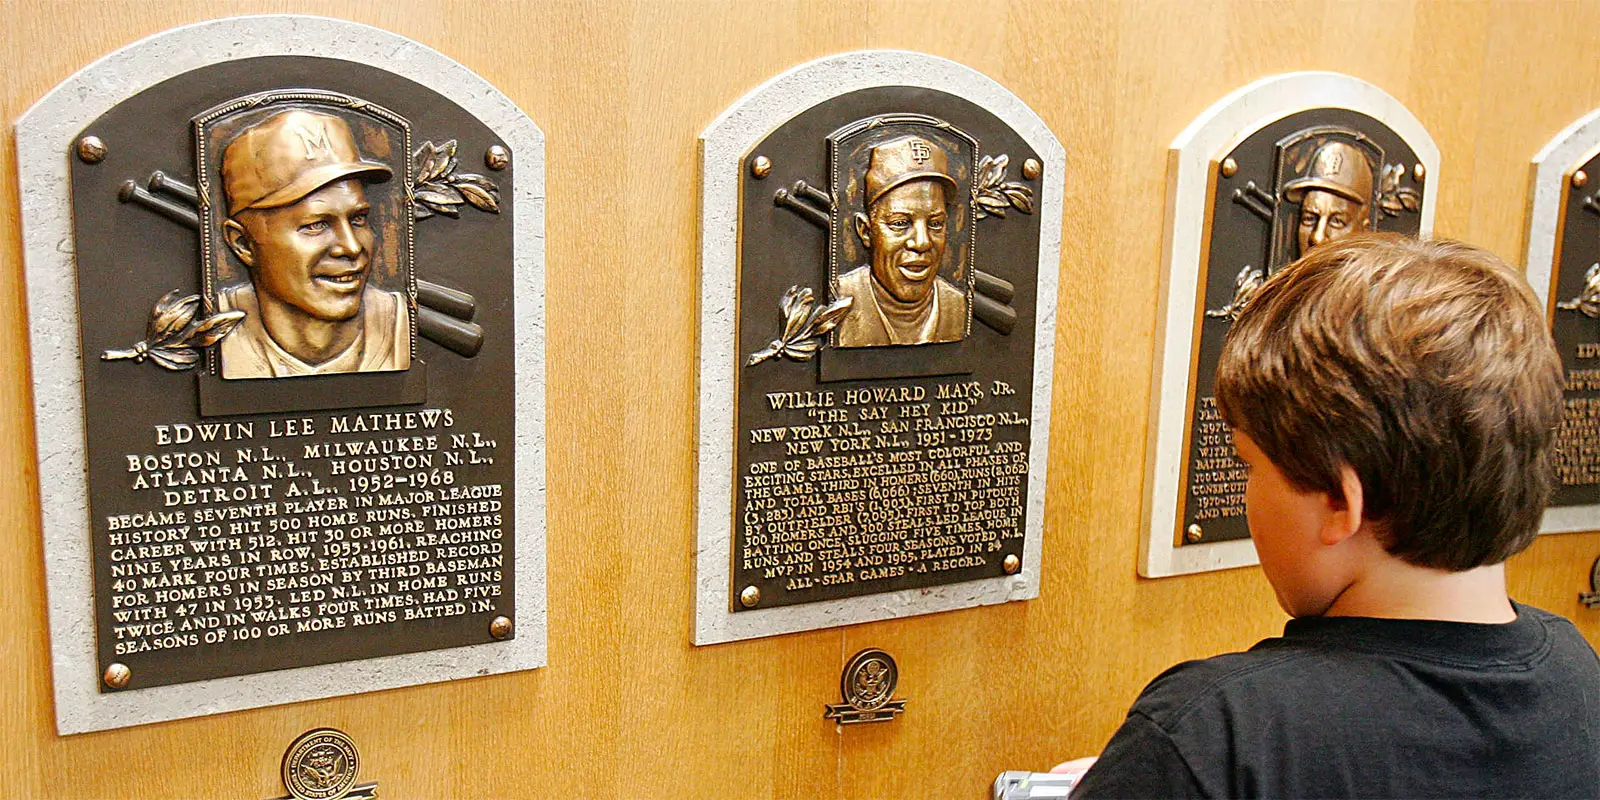 Feller, Robinson make history with Hall of Fame elections